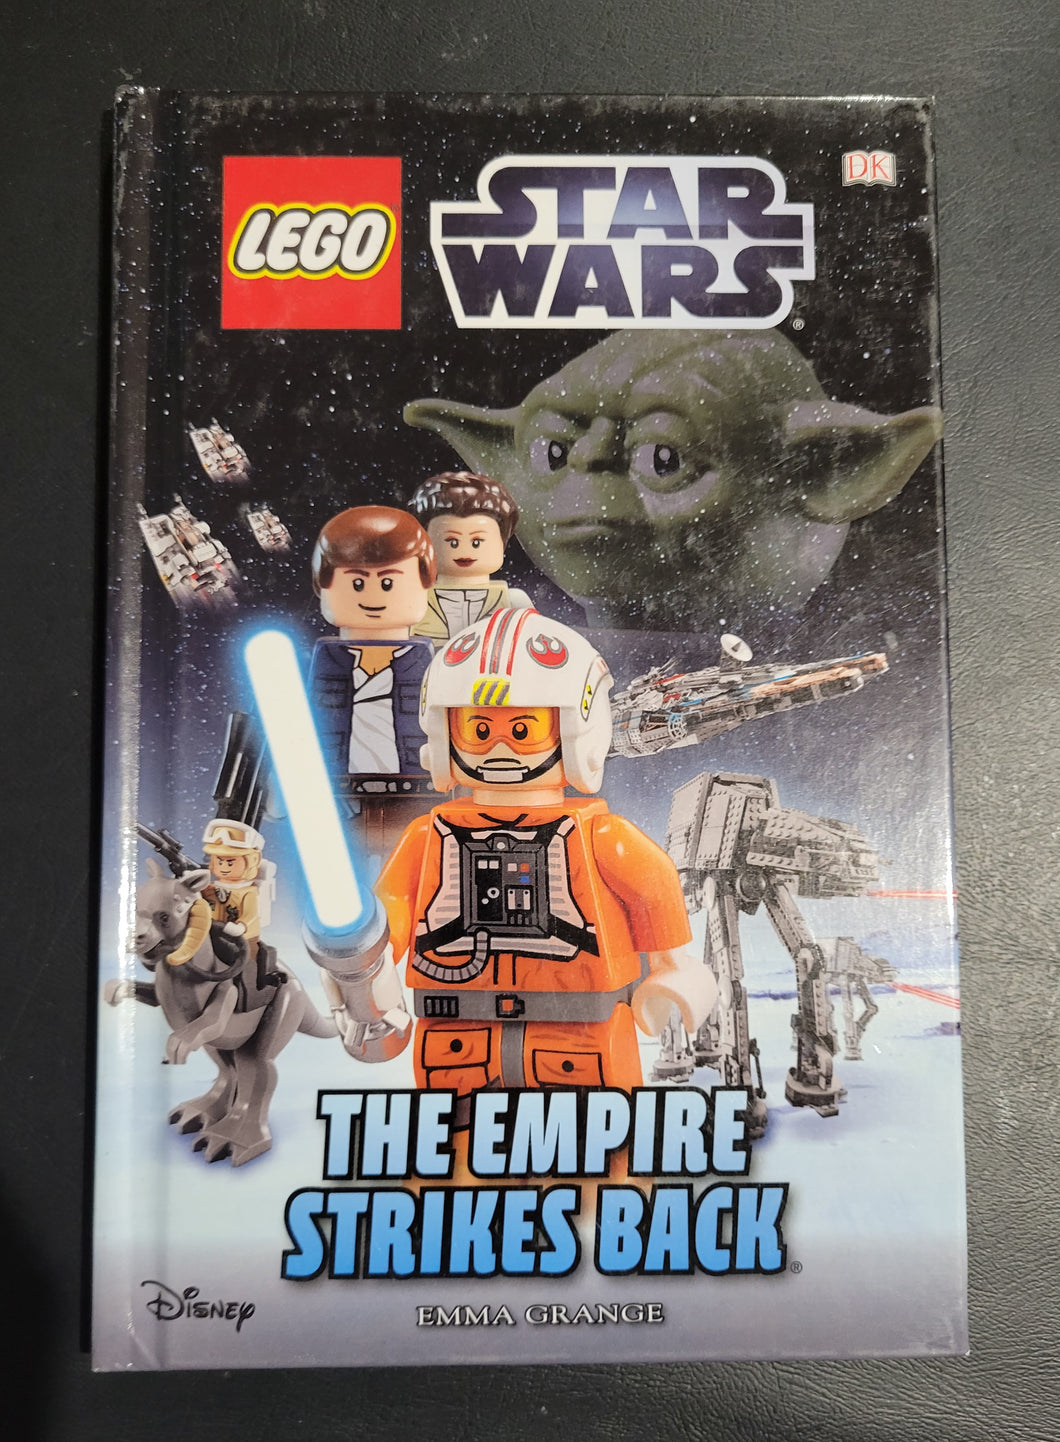 Lego Star Wars The Empire Strikes Back (Hardcover)